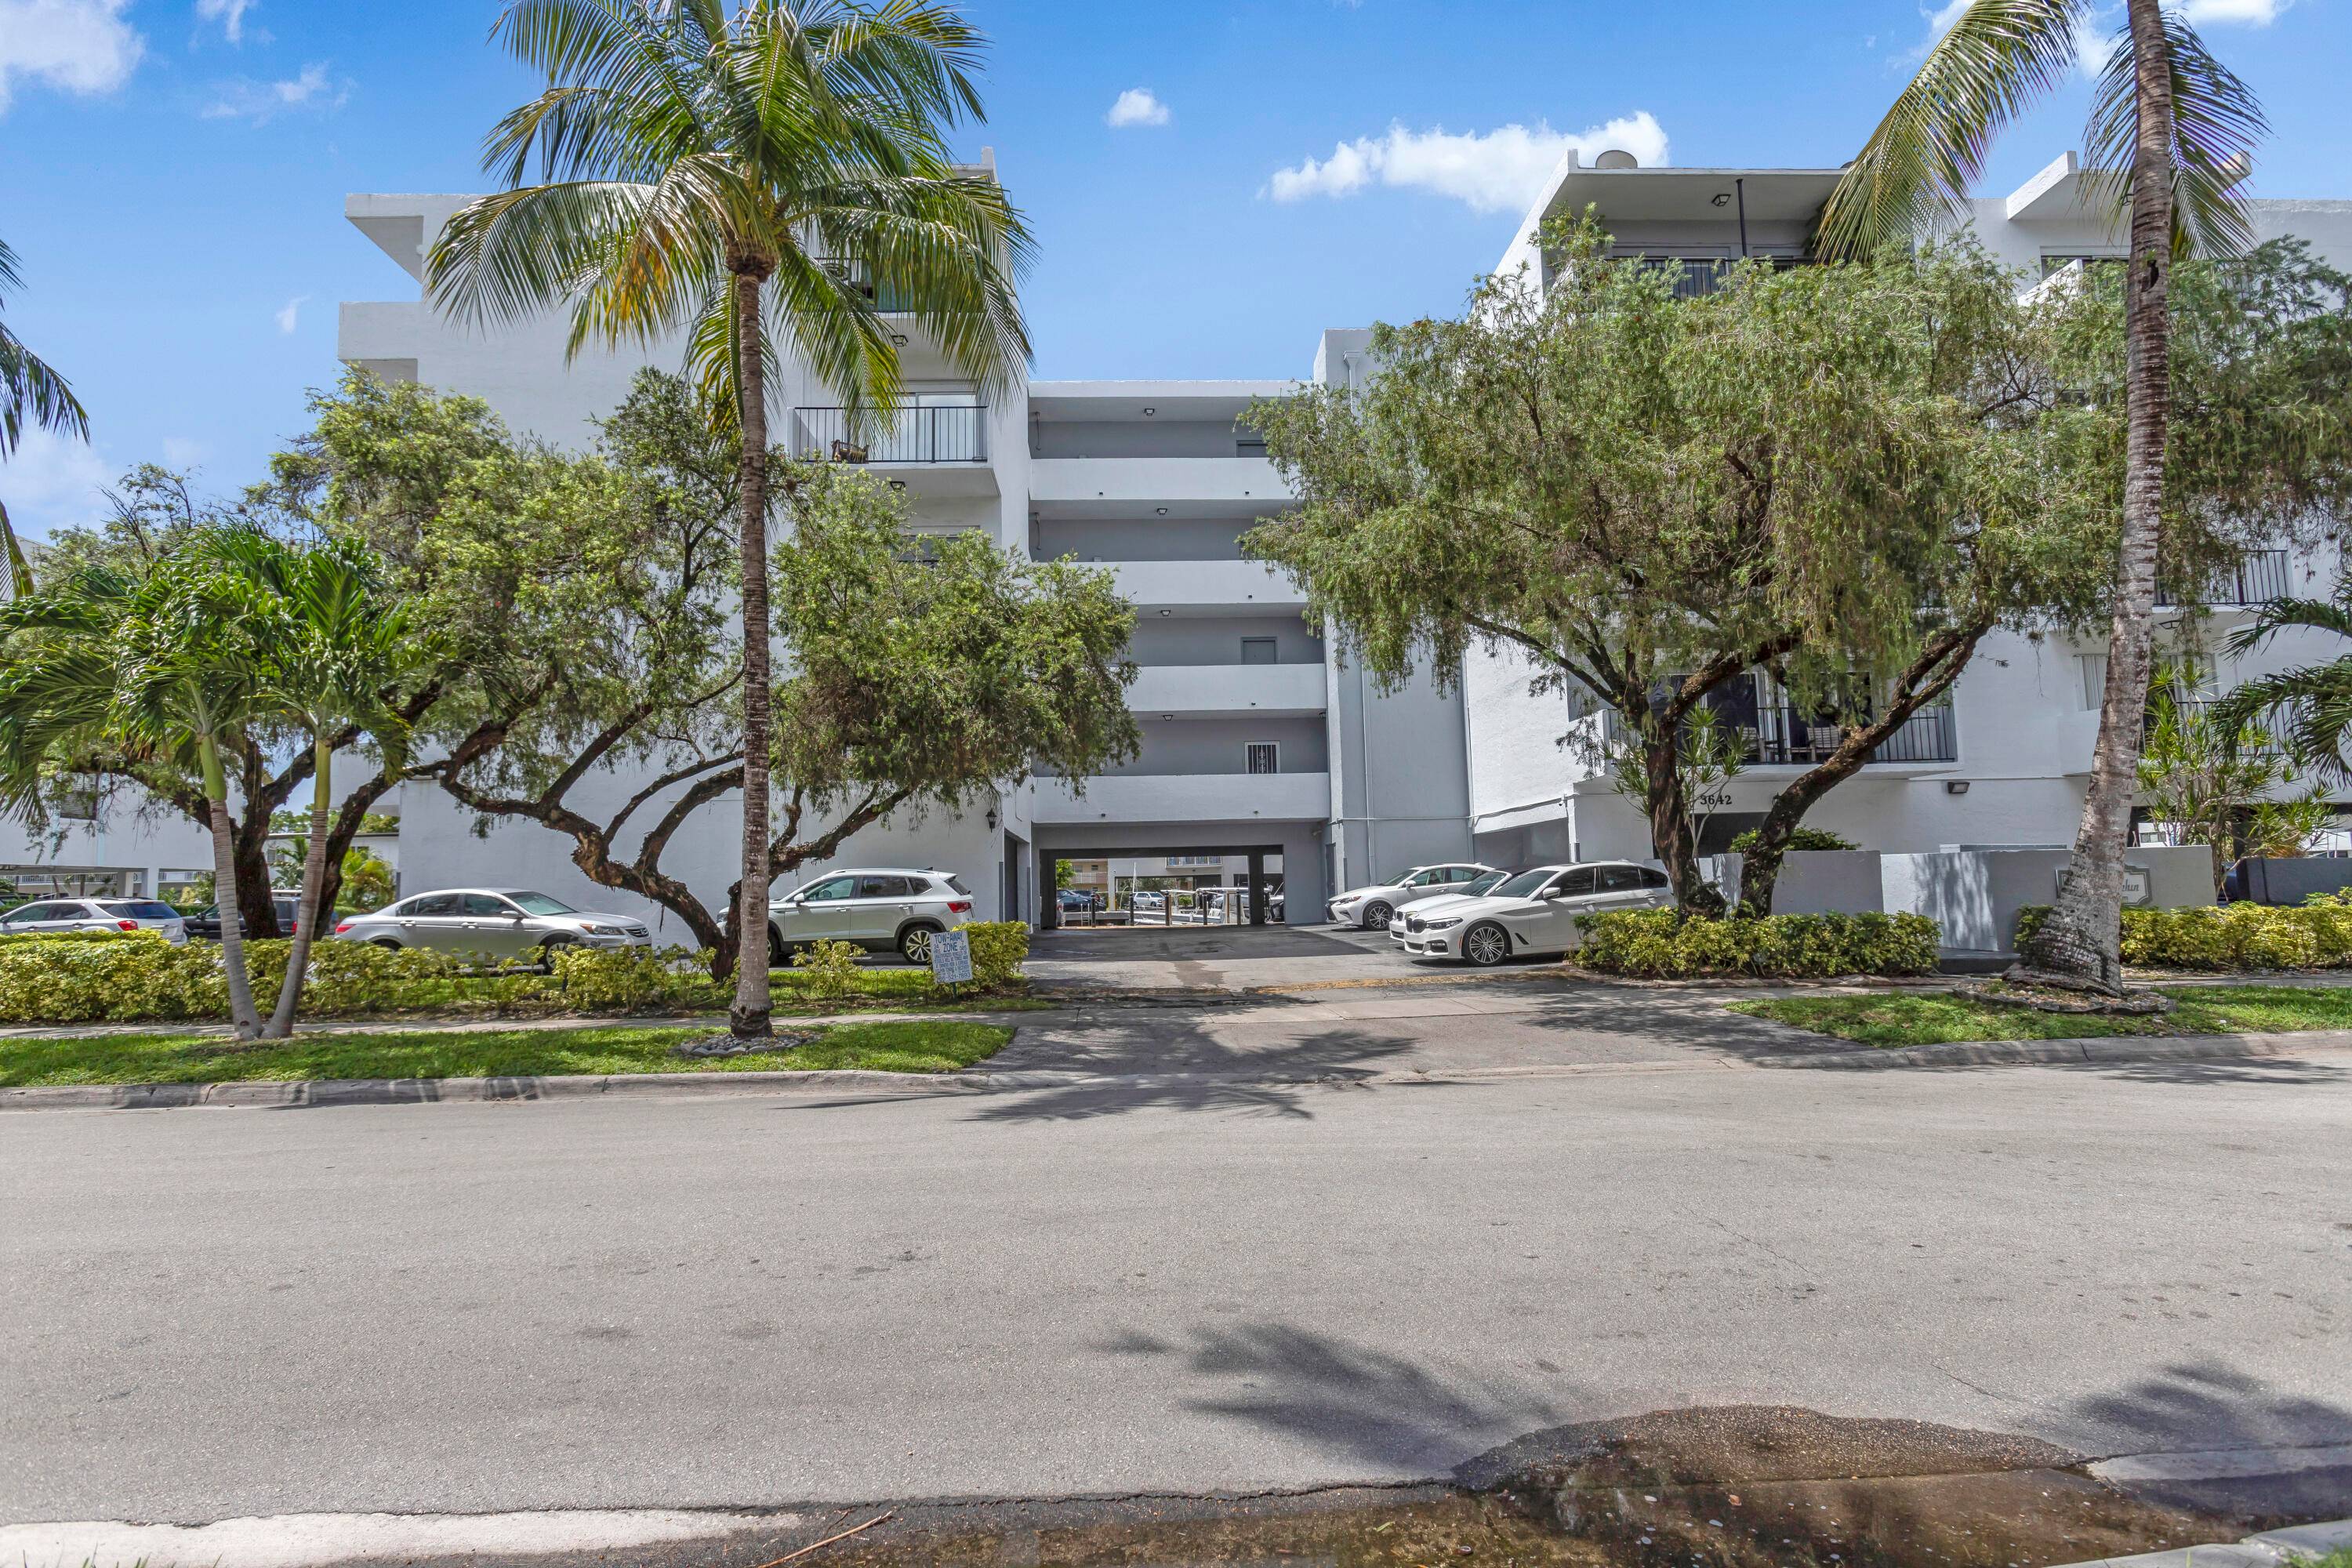 Welcome to this stunning newly renovated condo located in the heart of North Miami Beach, just minutes away from the renowned Aventura Mall, Haulover Beach Park, and an array of ...